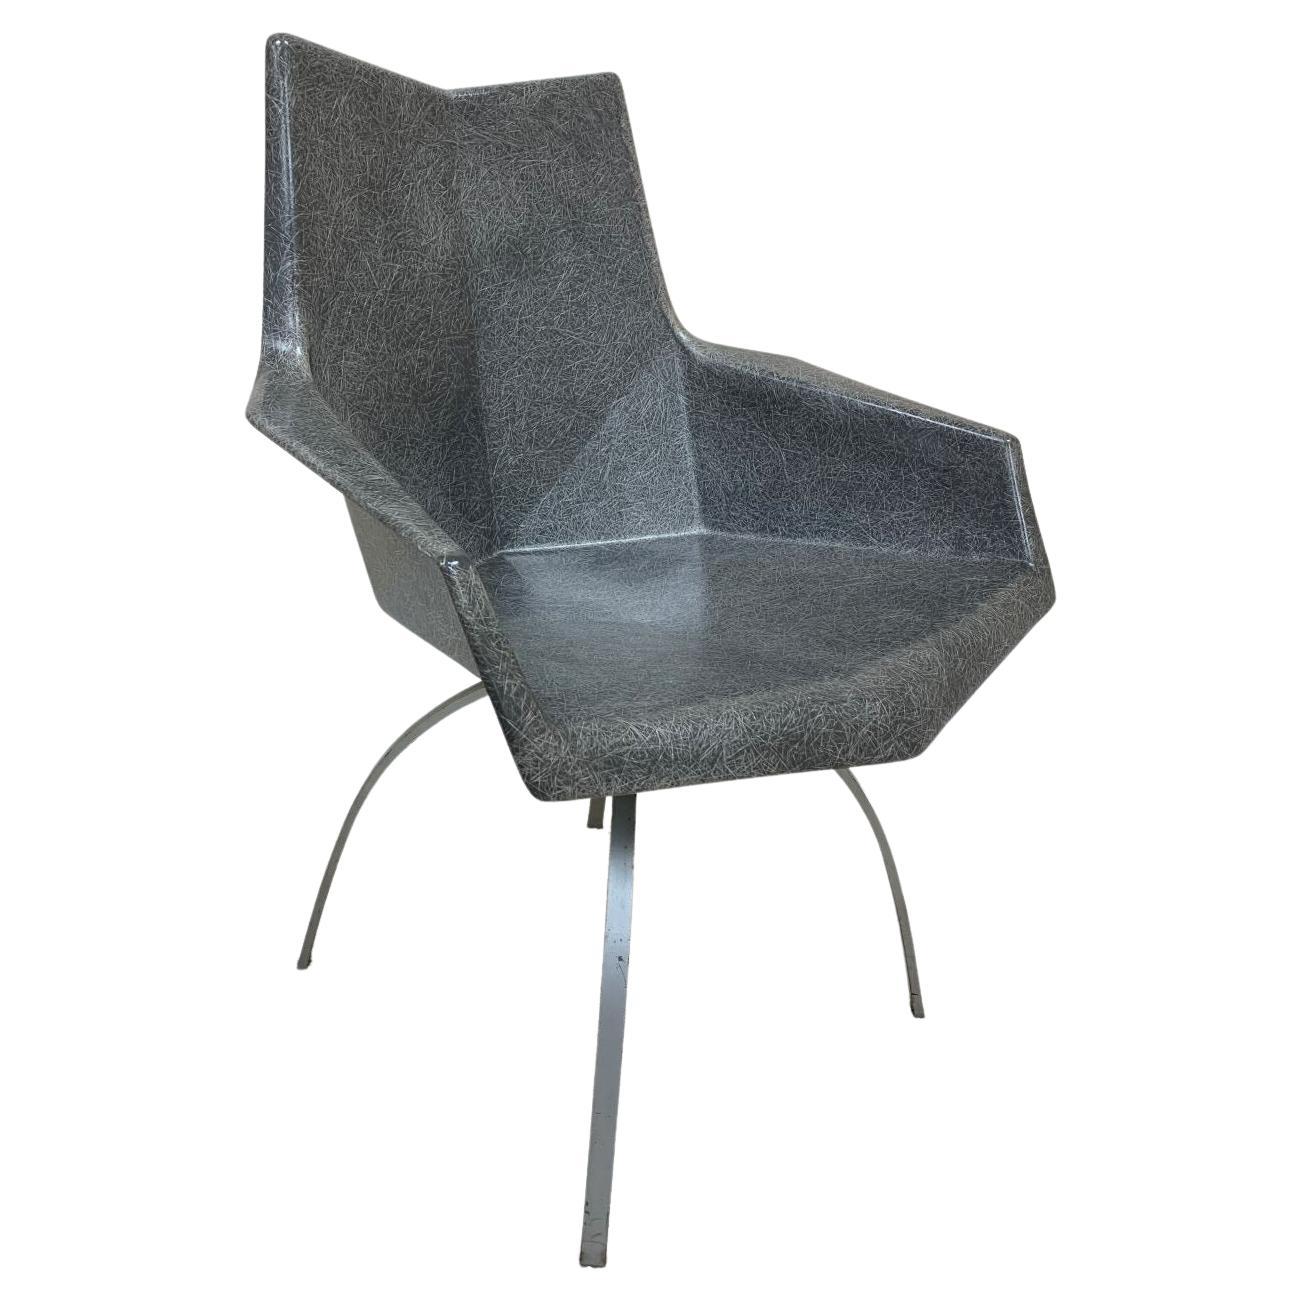 Rarely seen and spectacular example of a 1960’s Vintage Paul McCobb fiberglass arm chair with spider base. Made by the St. John Seating Company New York NY. Fiberglass is excellent condition and the base has minimal original paint loss. Dimension